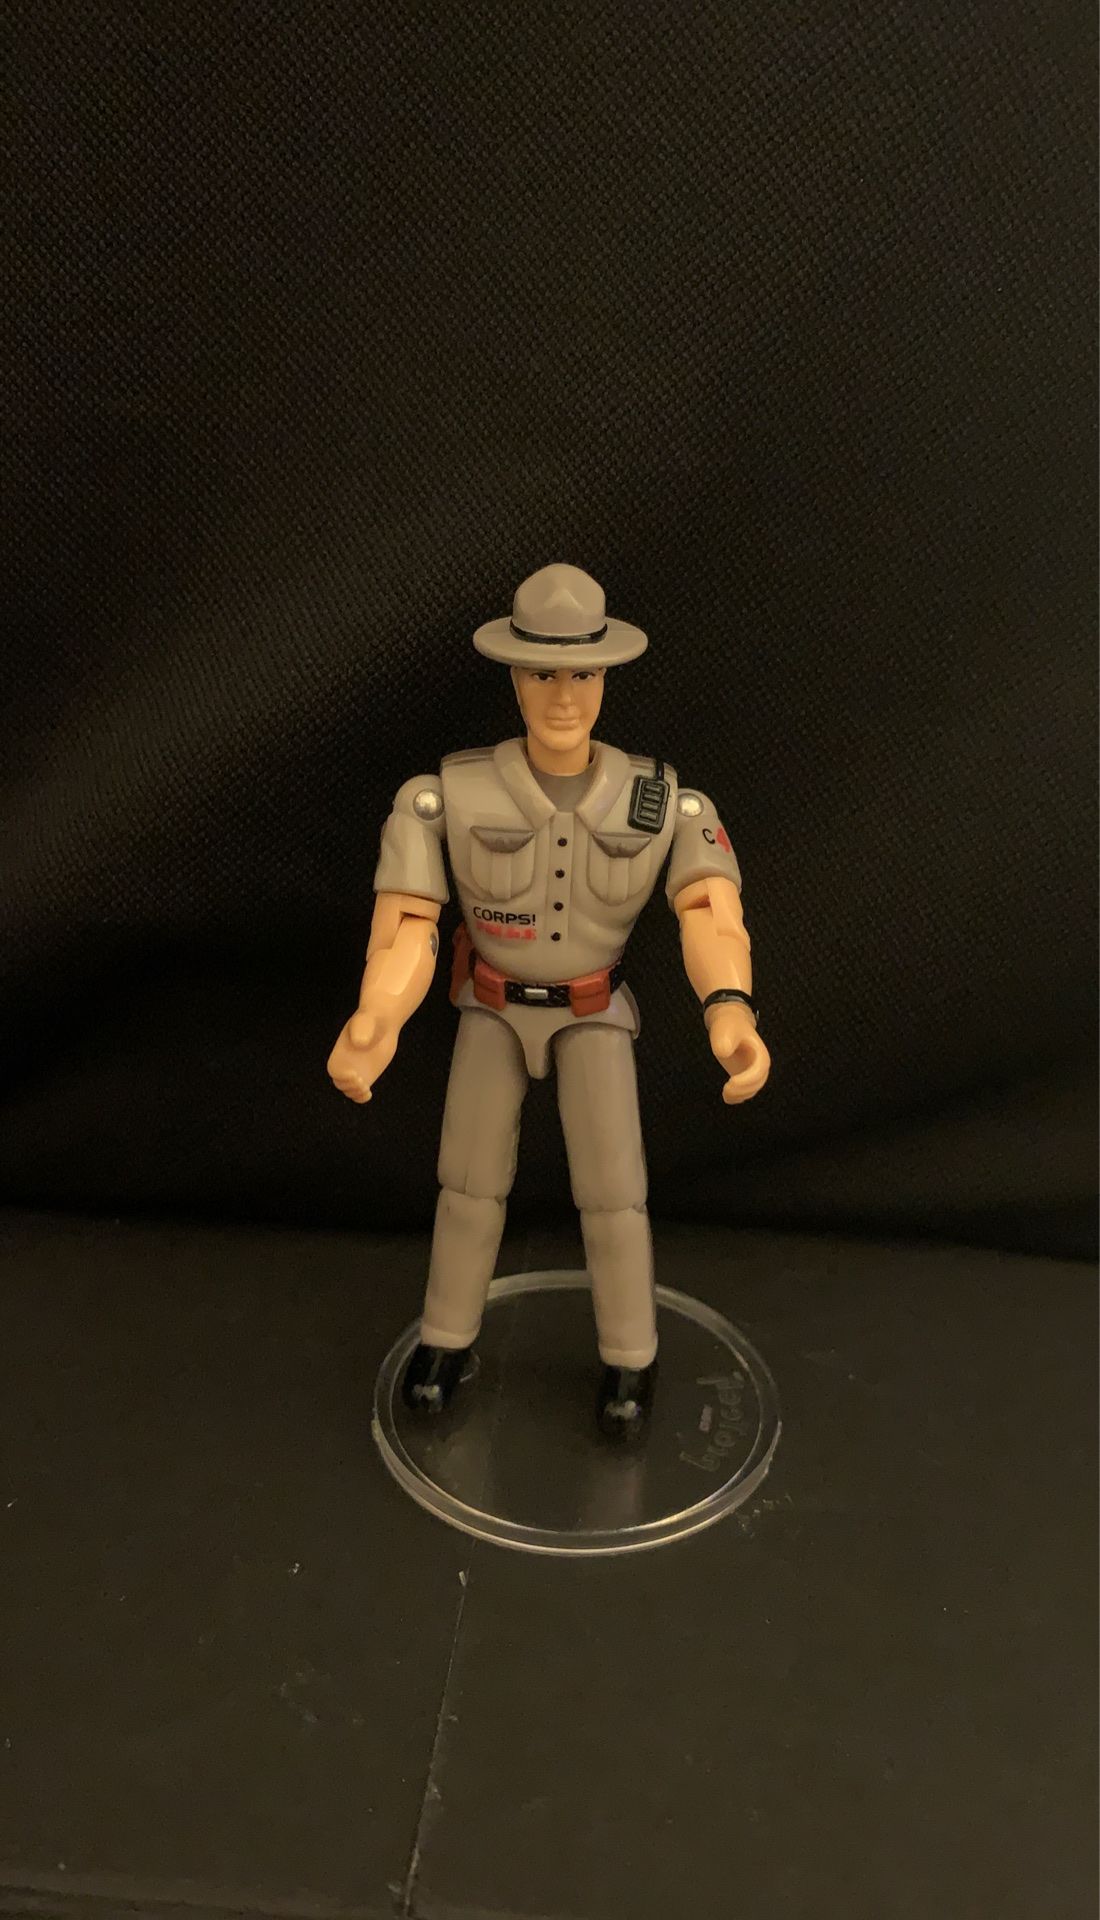 Lanard The Corps Police With Shades 1999 Action Figure Rare variant